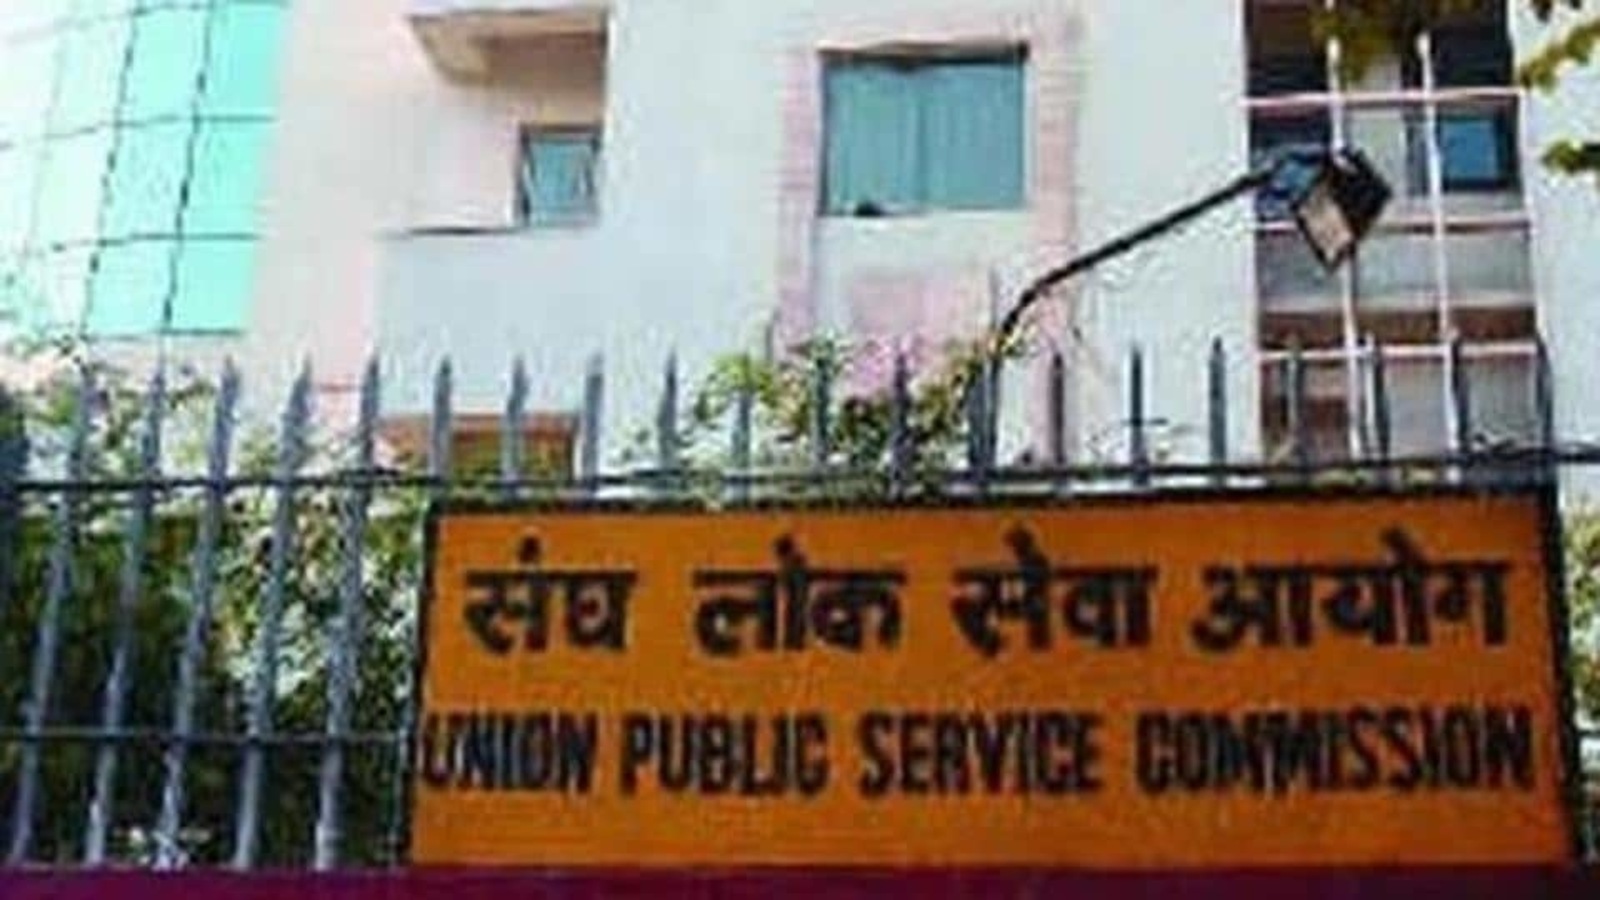 UPSC CSE 2020 interview schedule released, admit cards shortly